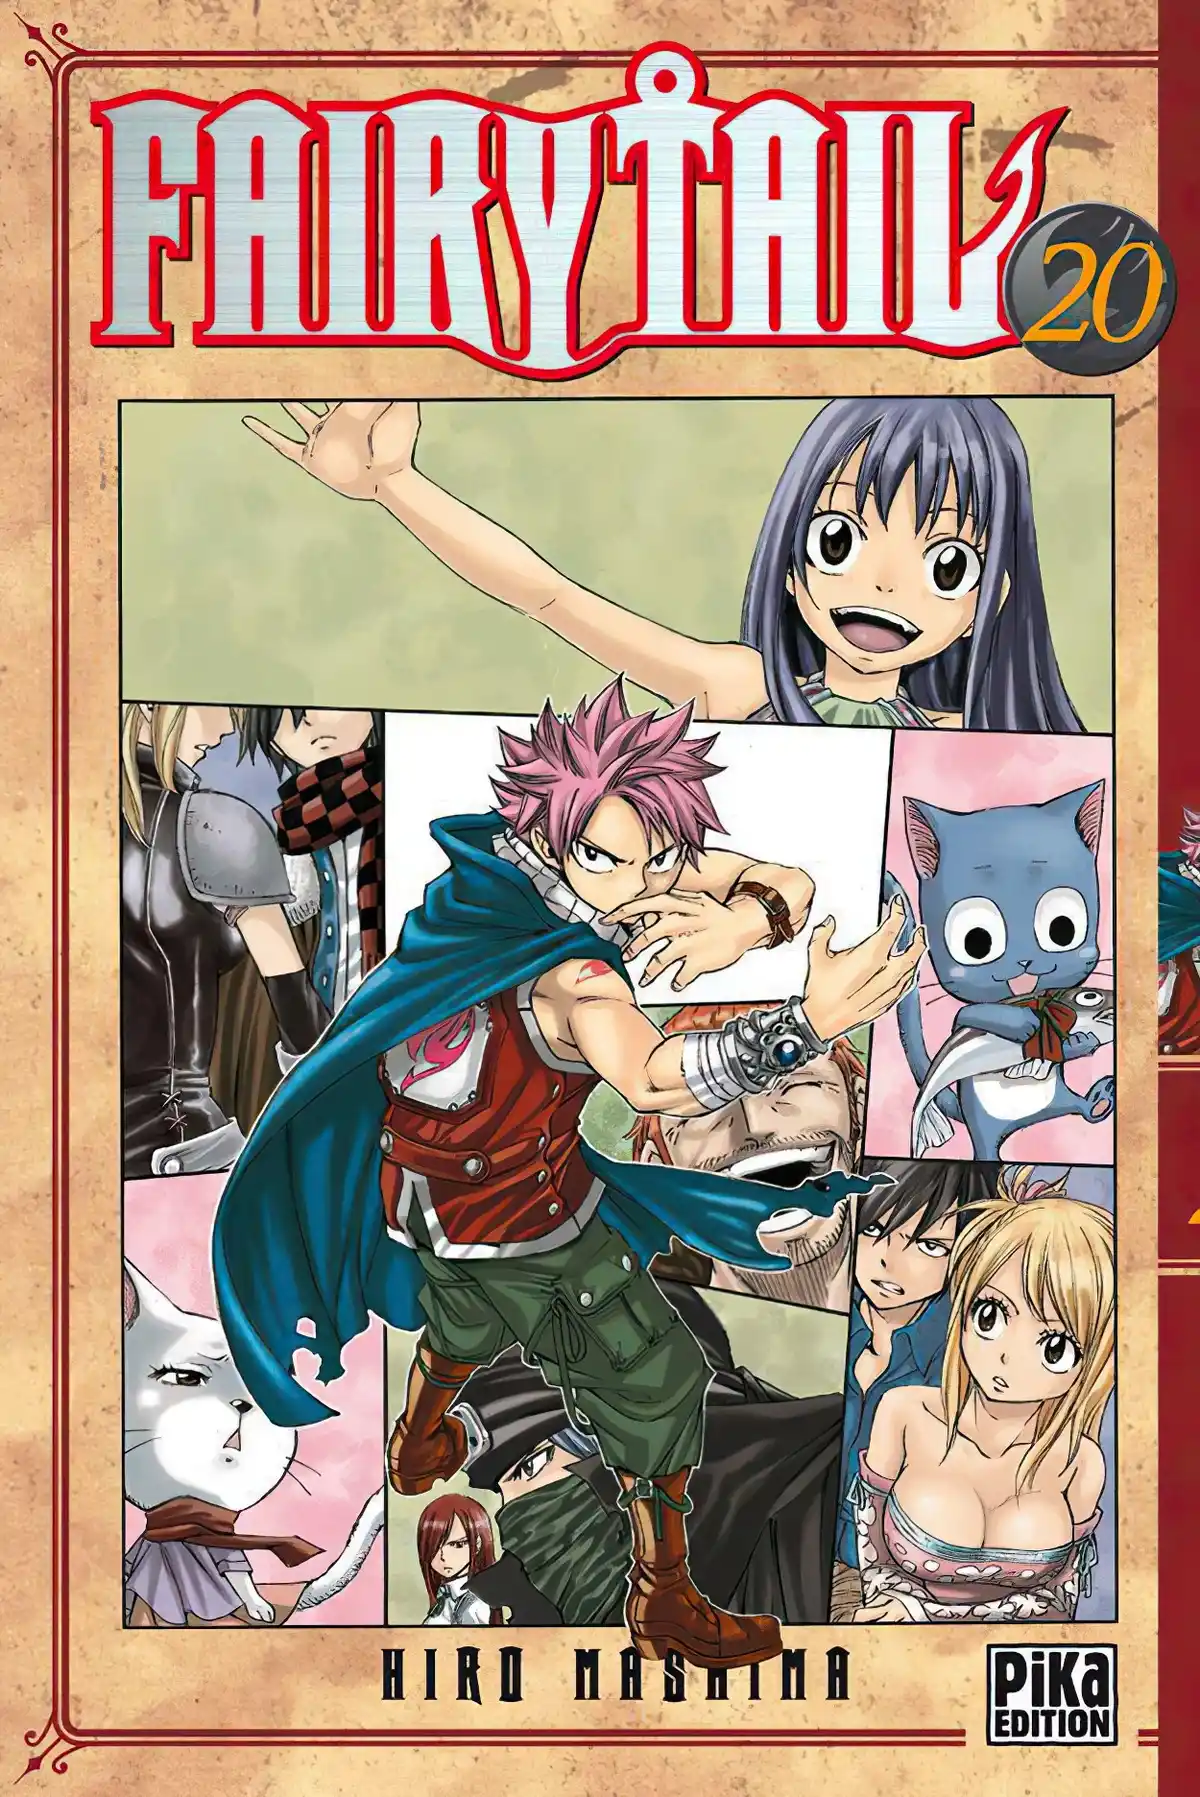 Fairy Tail Volume 20 page 1